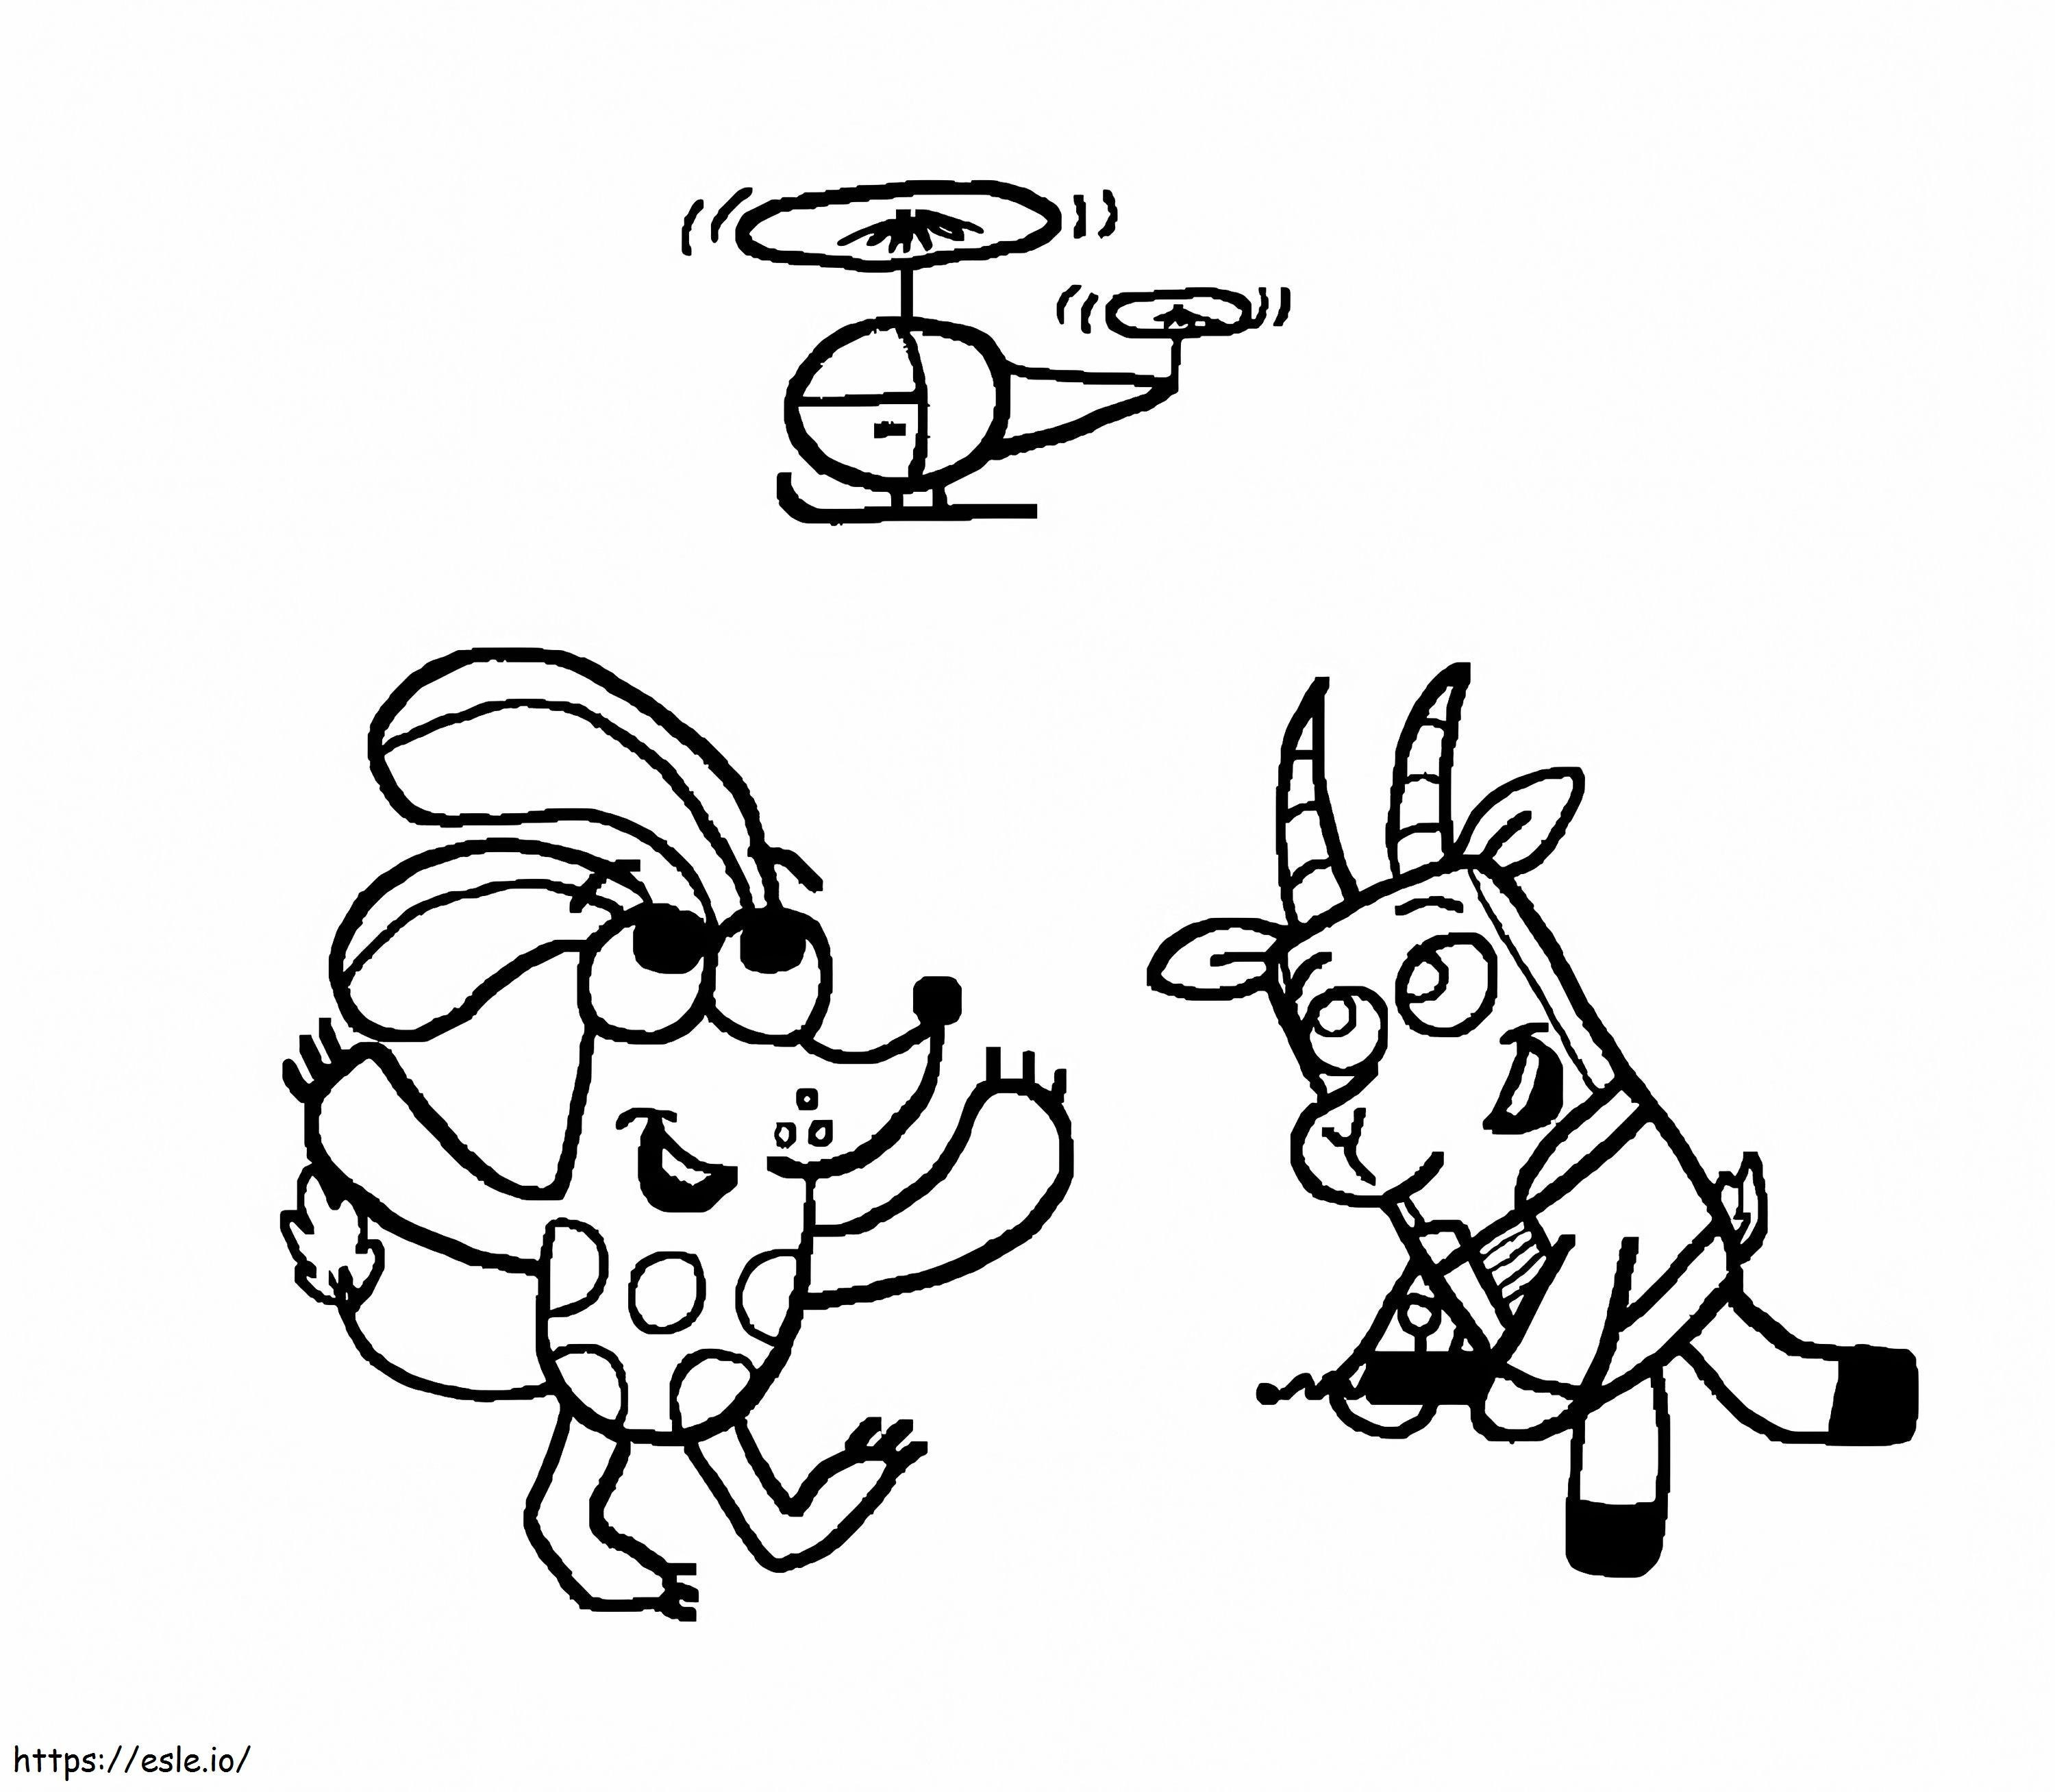 1583138595 Fight G 3 coloring page